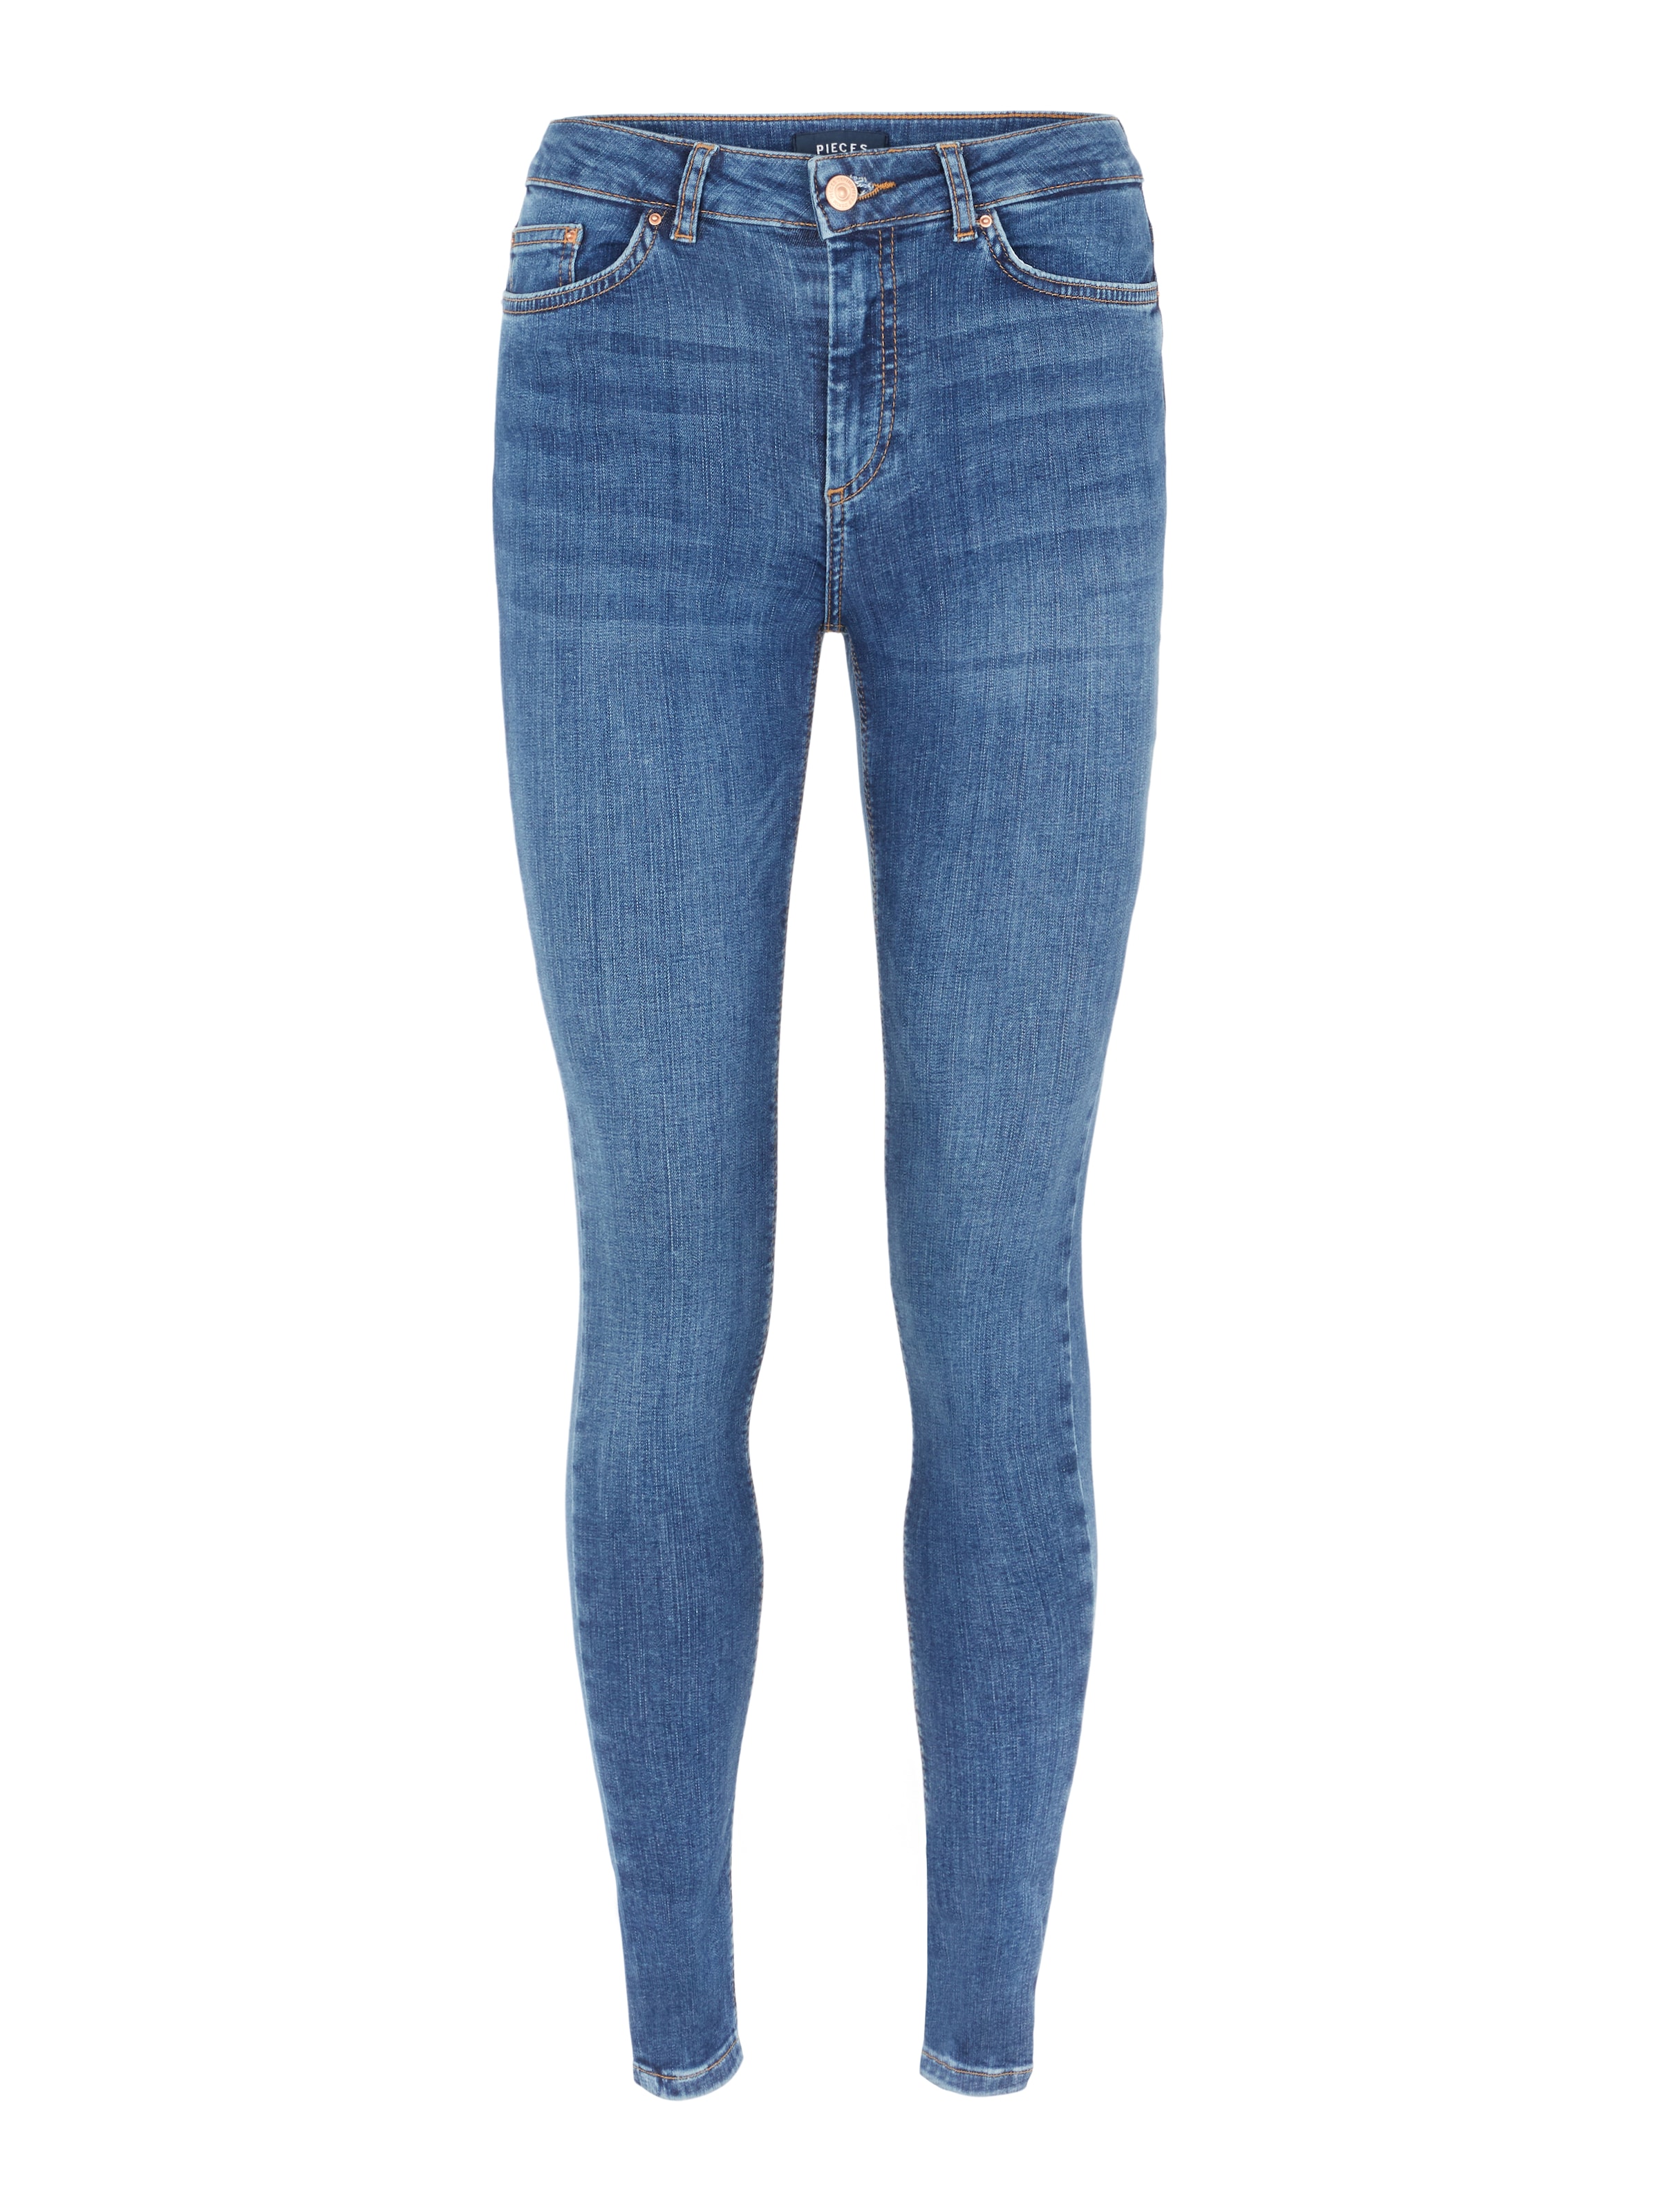 Pieces Maternity Jeans Delly in Blau 